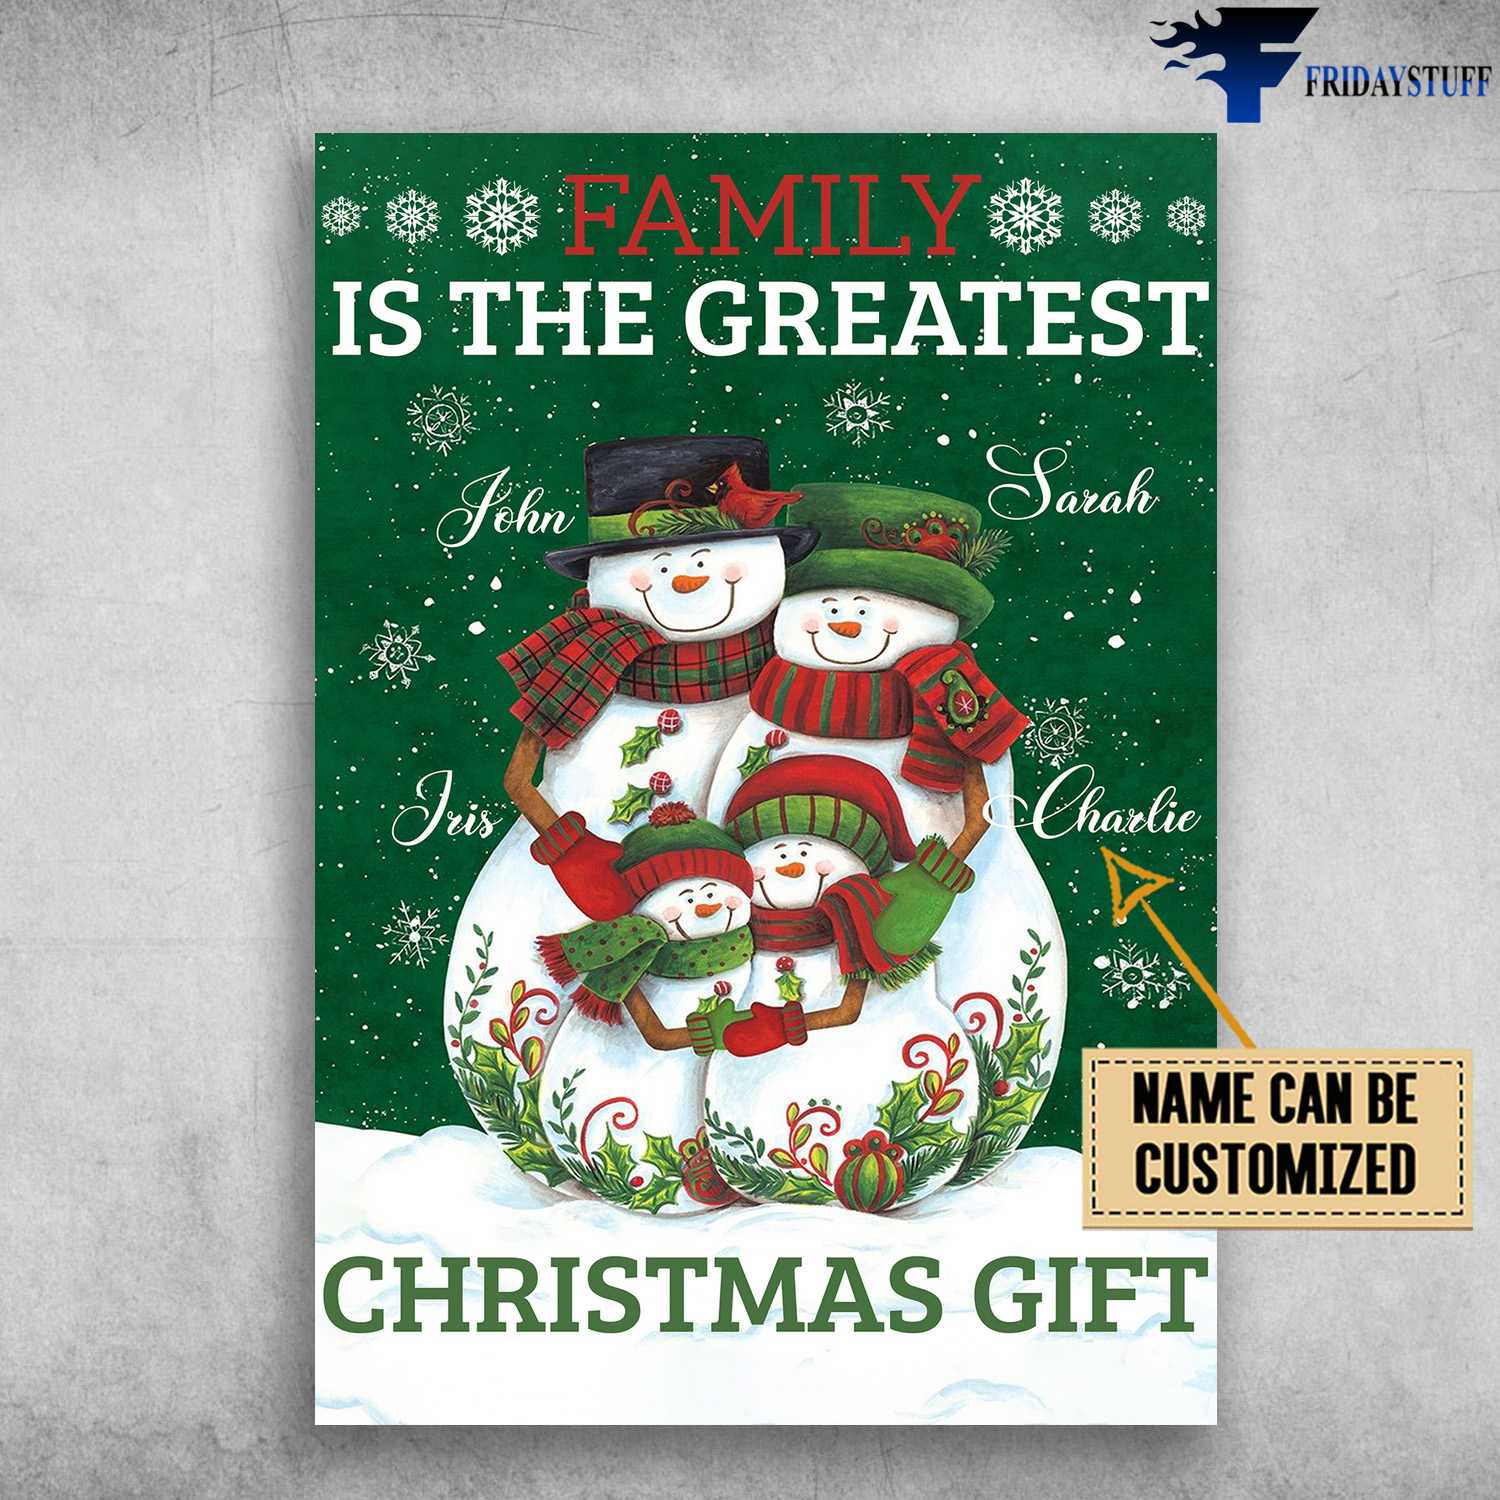 Christmas Poster, Family Gift, Family Is The Greatest, Christmas Gift